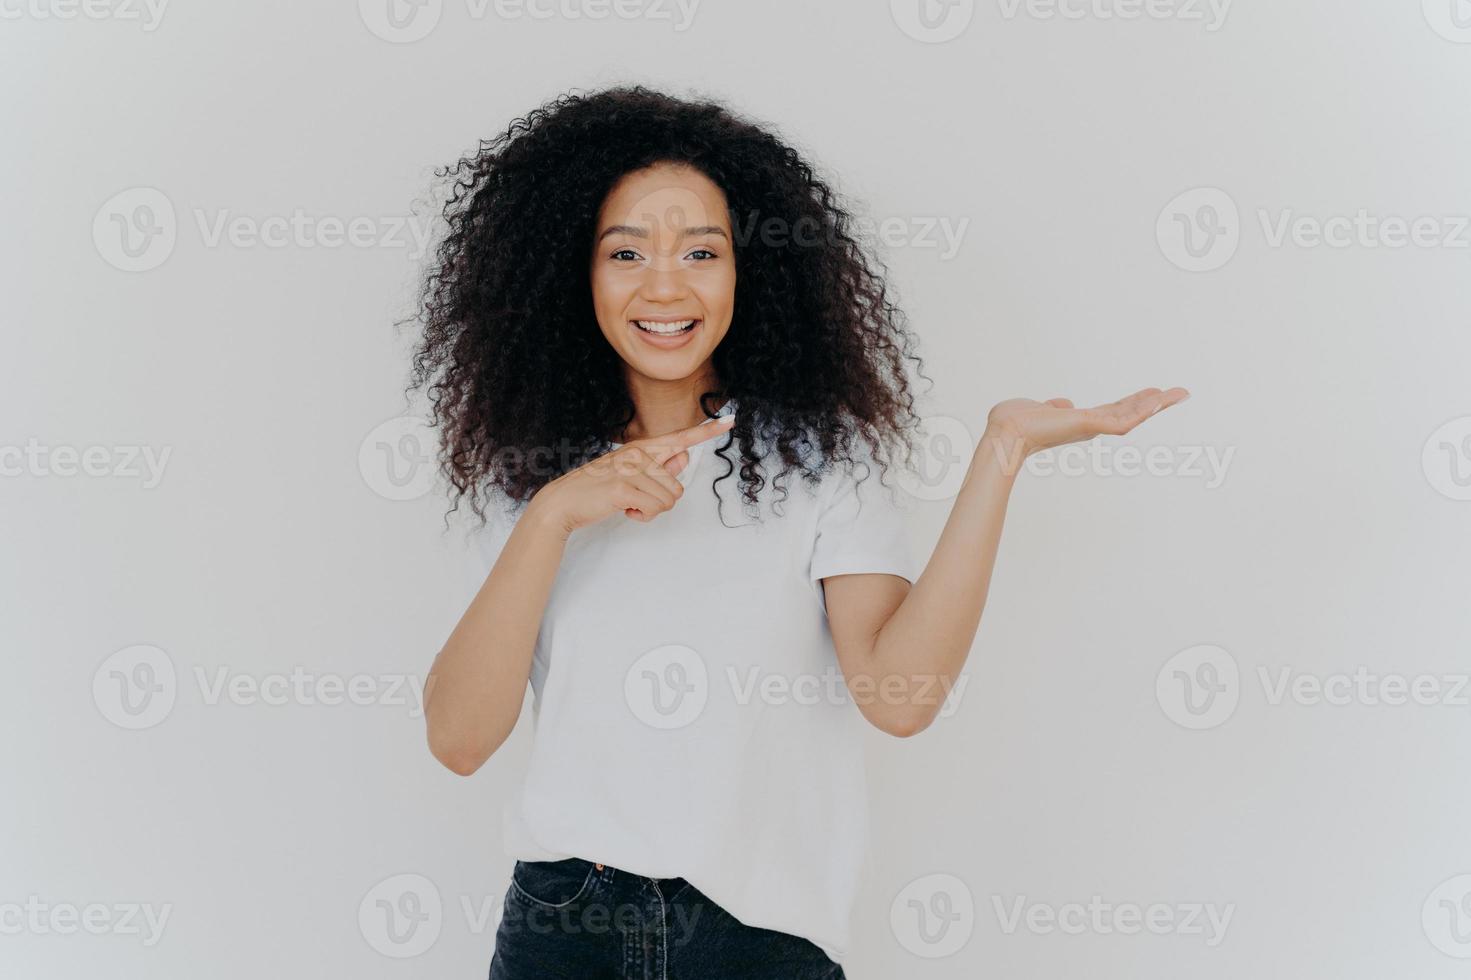 Choice is simple. Attractive feminine girl with Afro hair raises palm and points on blank space, makes decision, has toothy smile, wears casual wear, poses against white background. Look at this photo